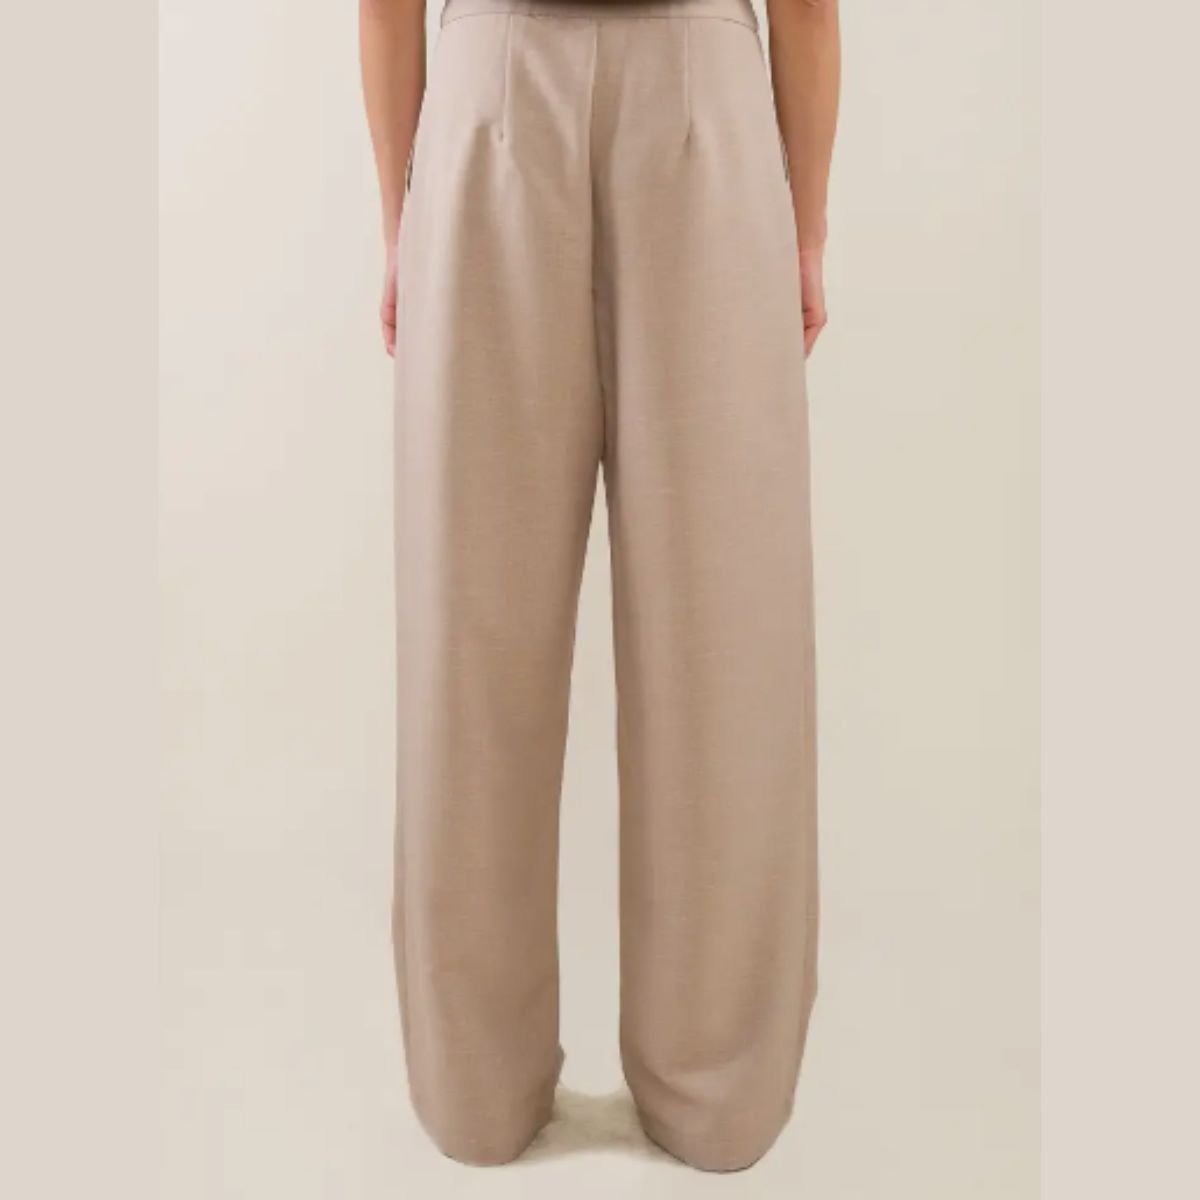 Taupe Straight-Leg Trouser - Sizes 3XL-S - dom+bomb